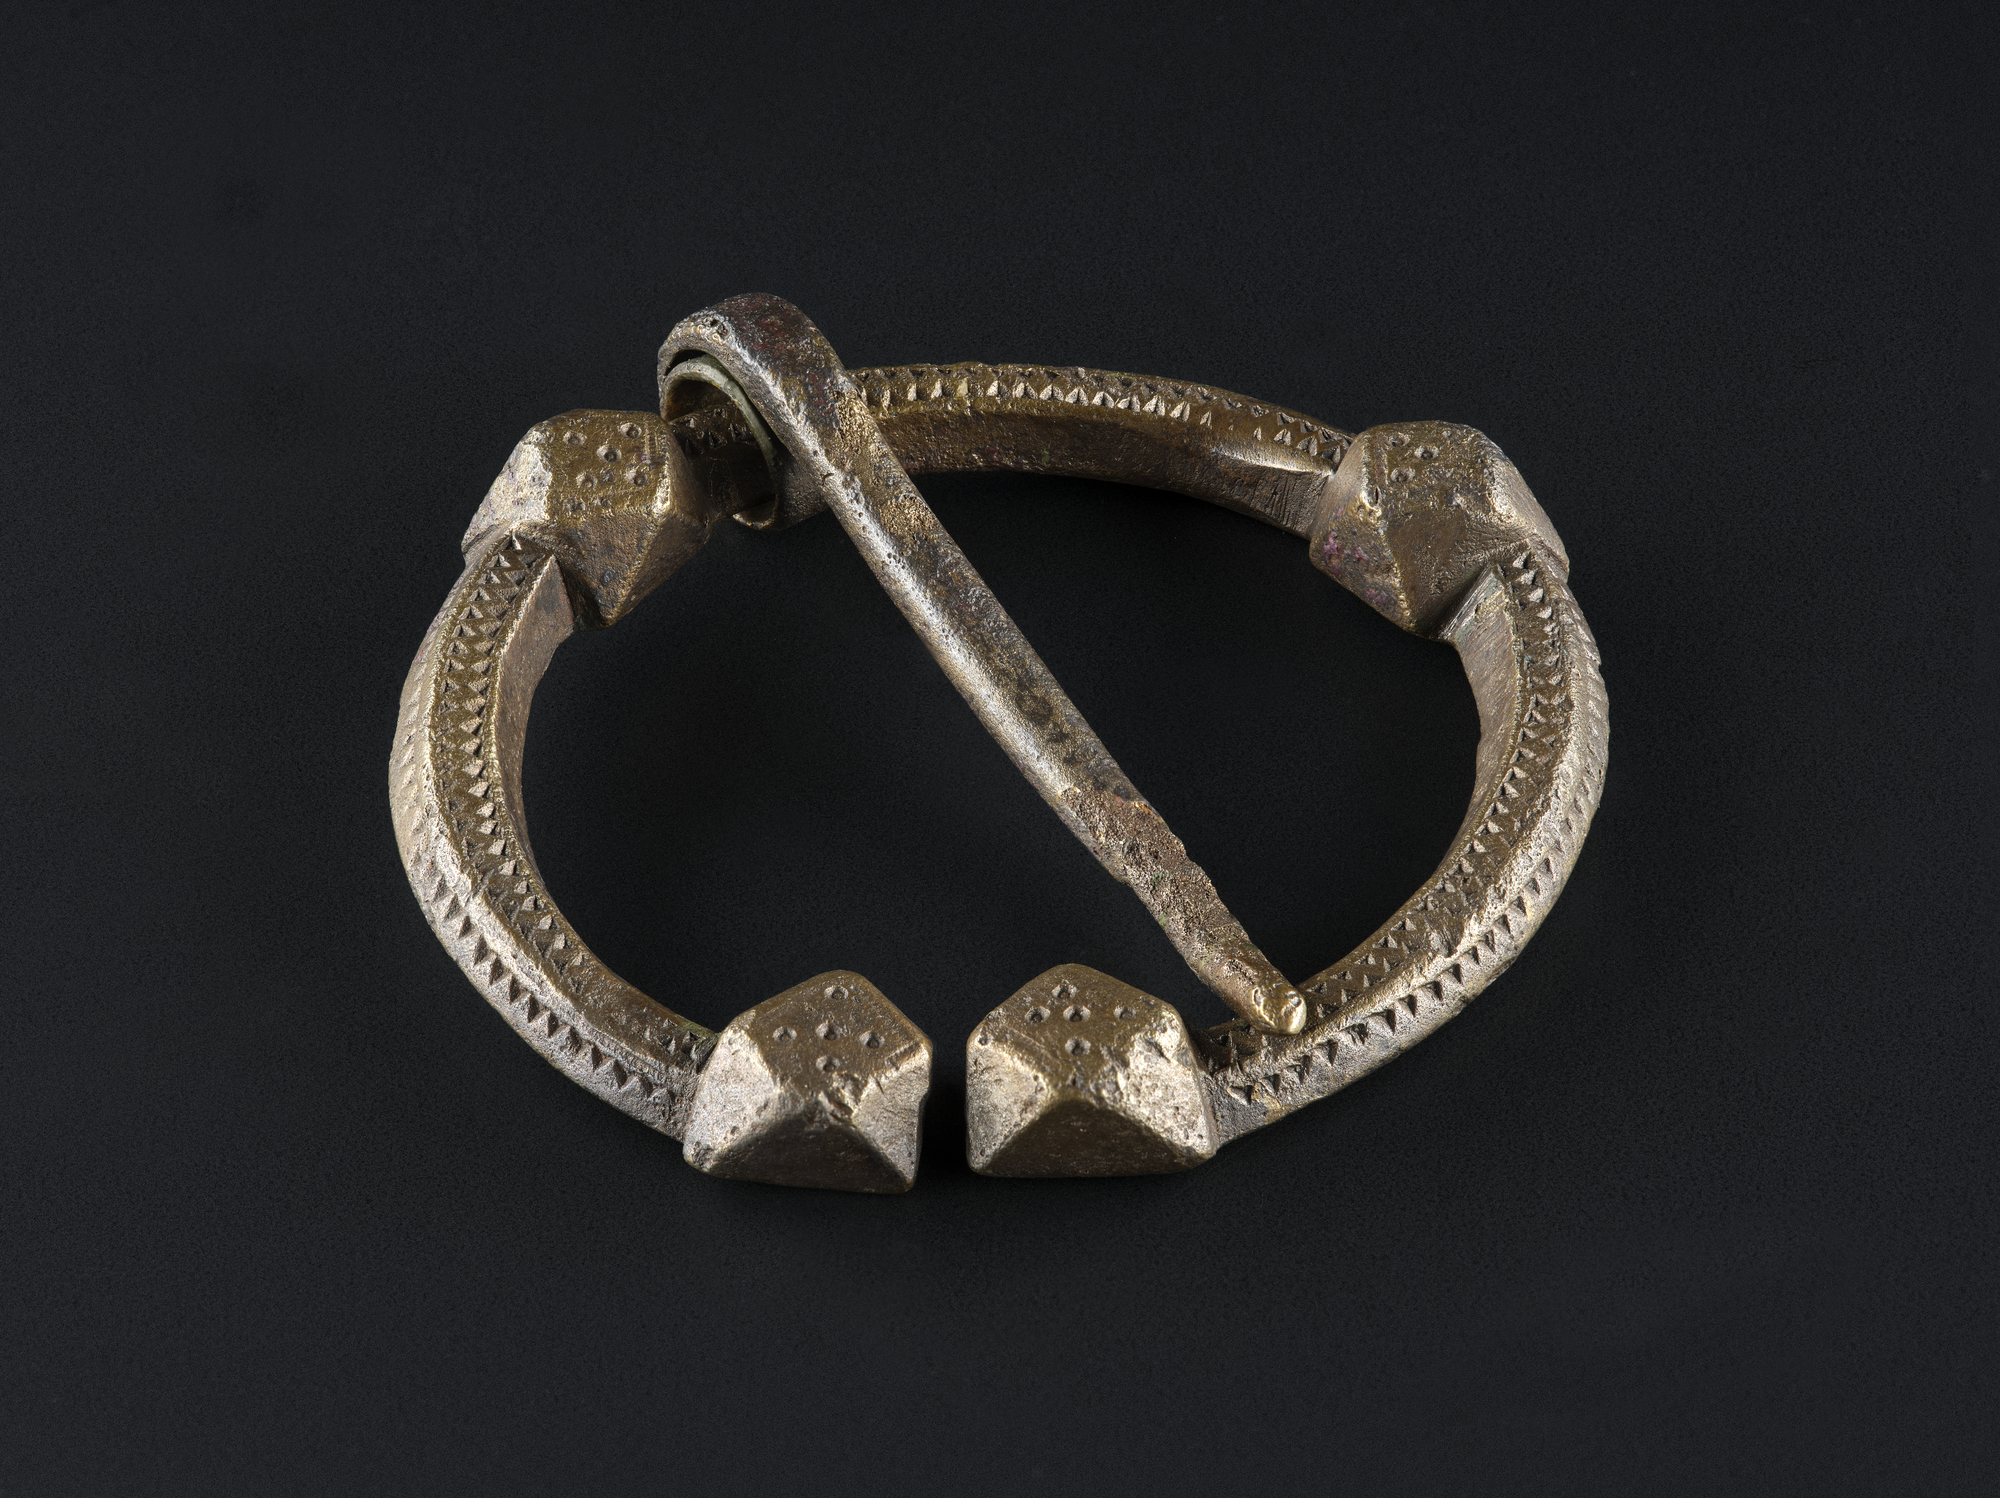 Image of Bronze penannular brooch found at Gogar Burn, Midlothian, 850 - 975 AD © National Museums Scotland